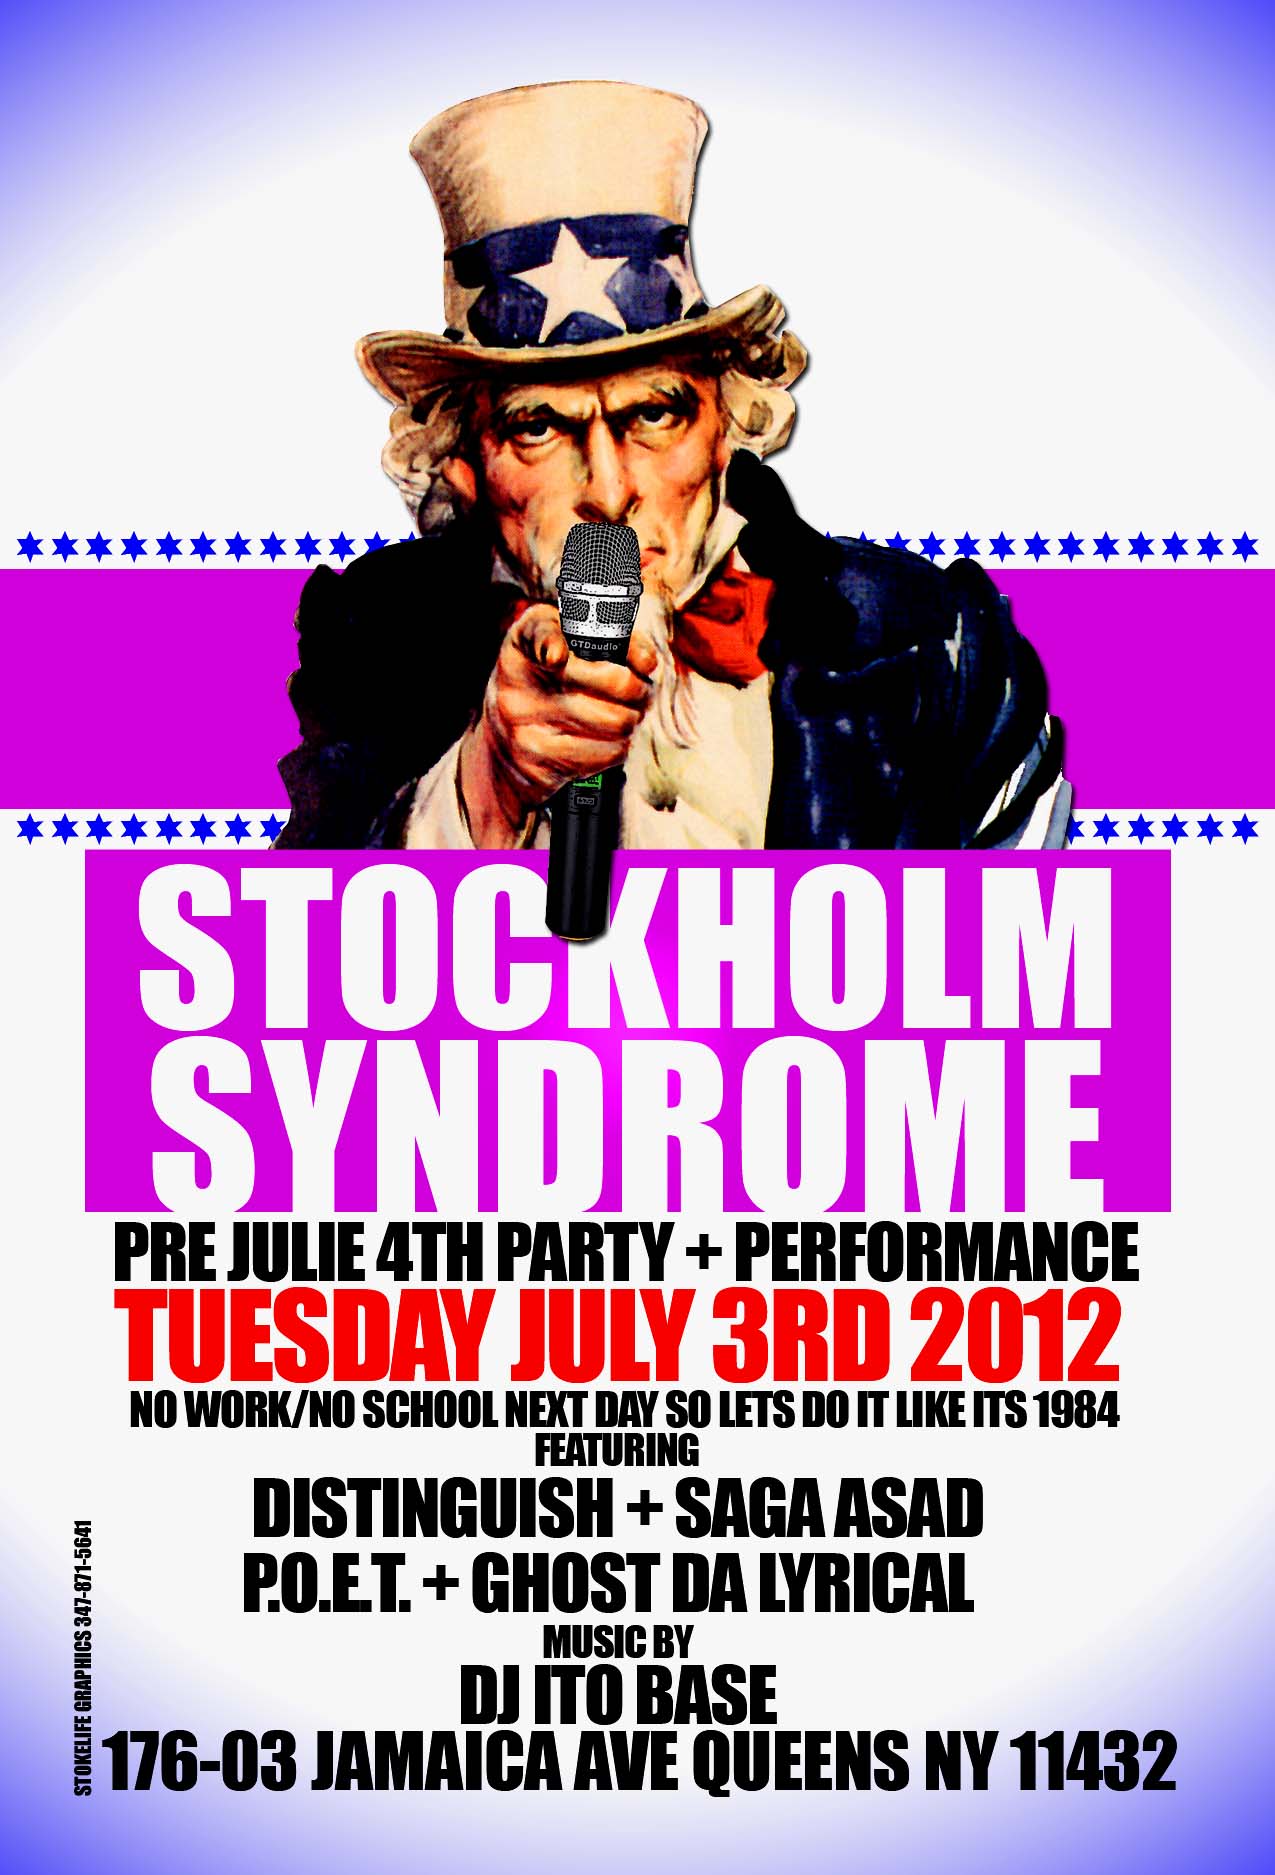 conscious ny hip hop party and show stockholm syndrome july 3rd 2012